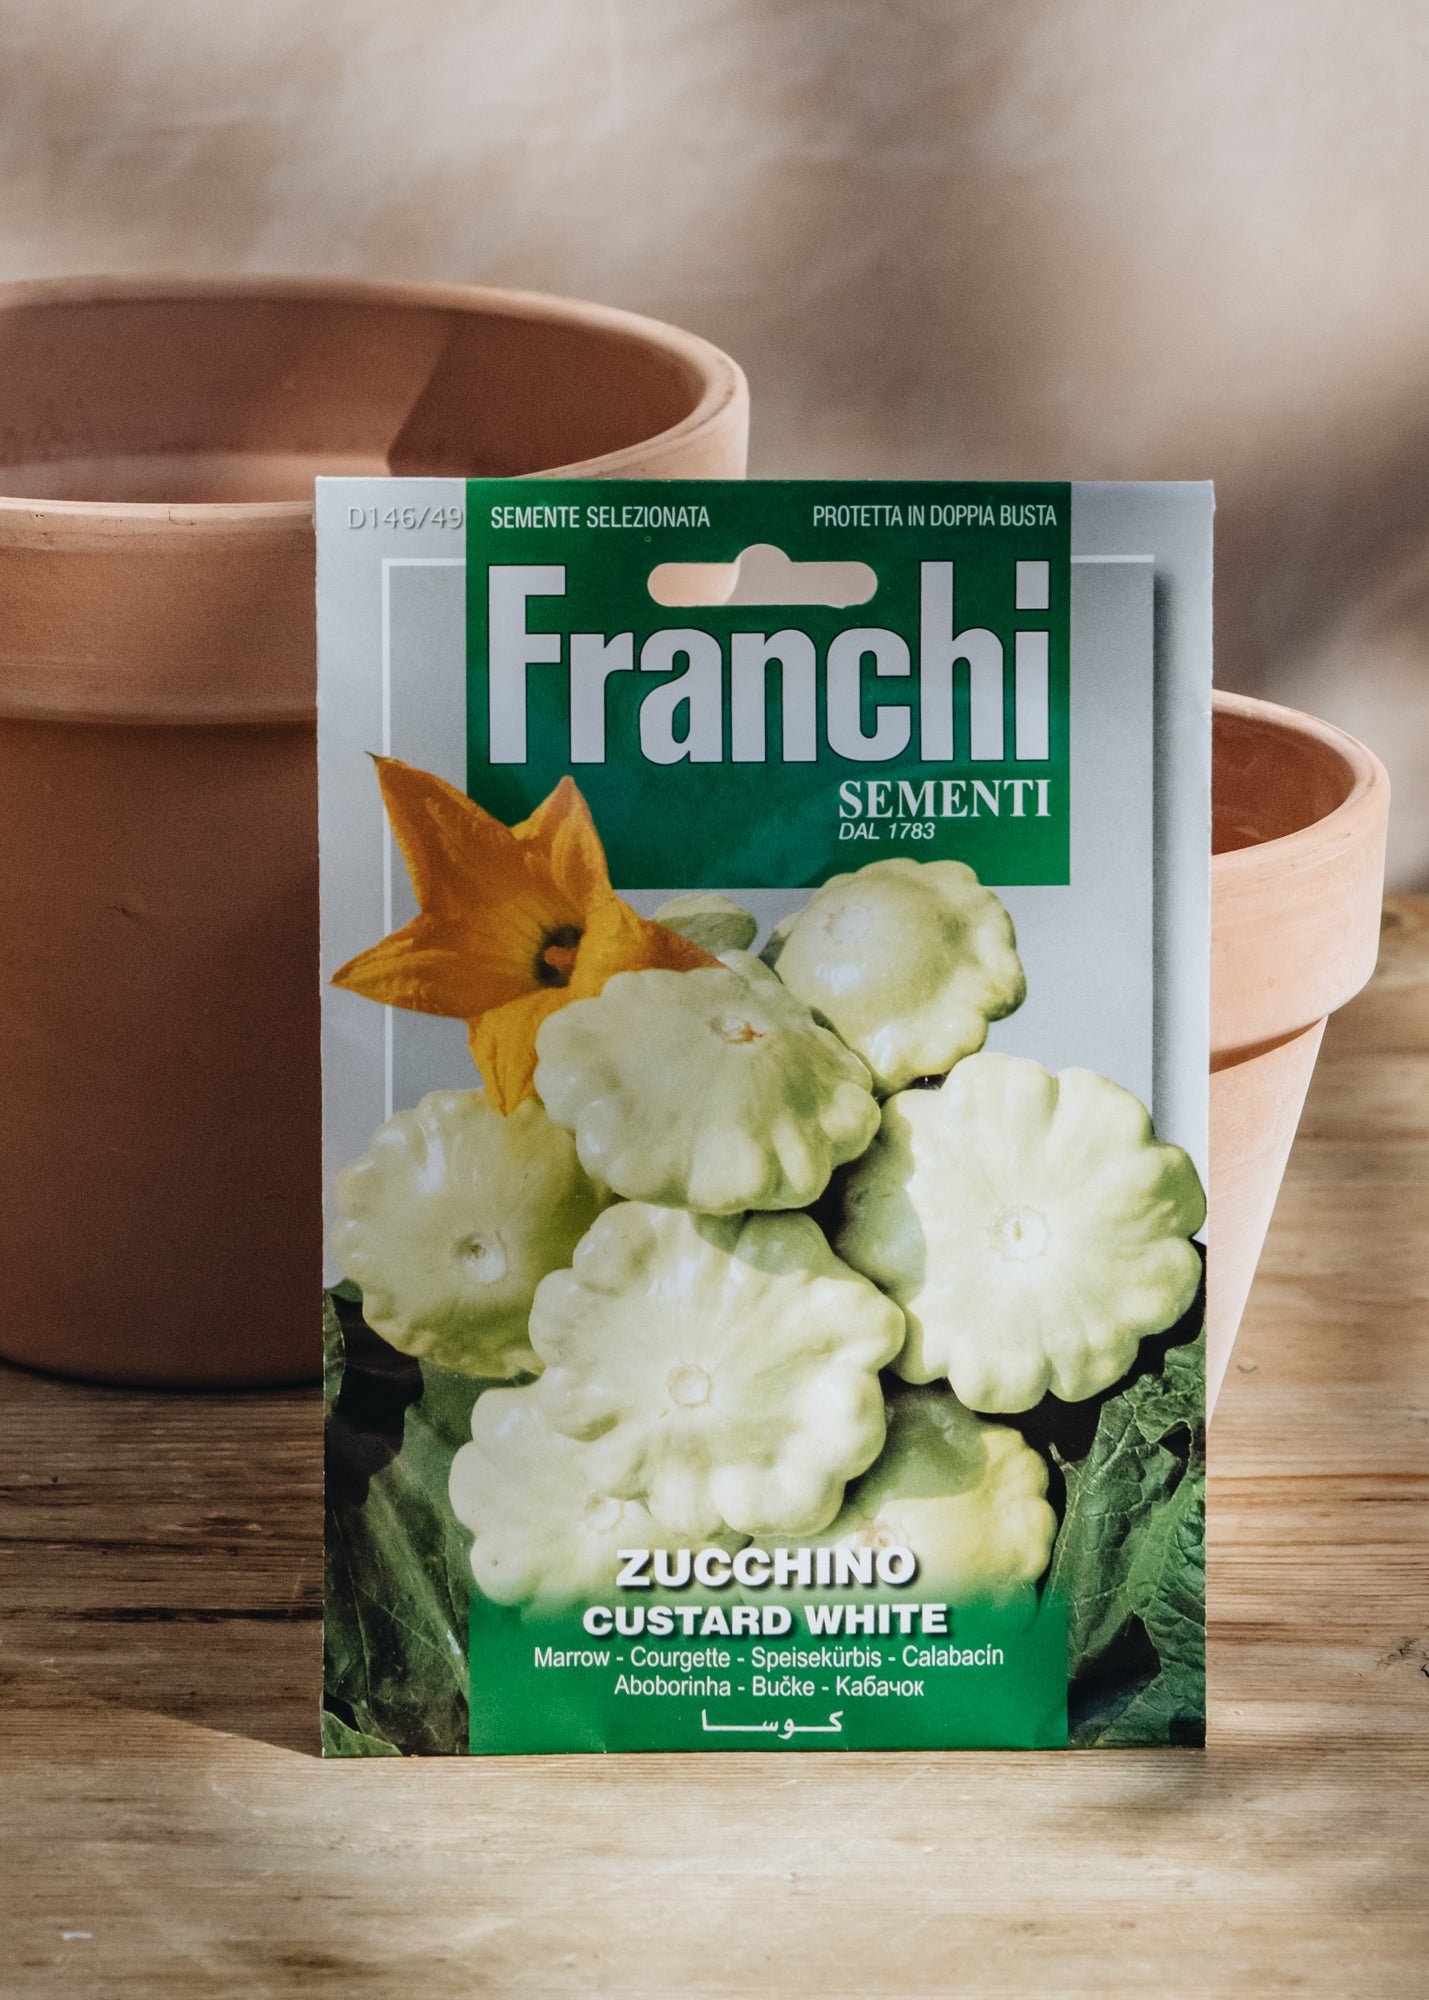 Franchi Courgette 'Custard White' Seeds